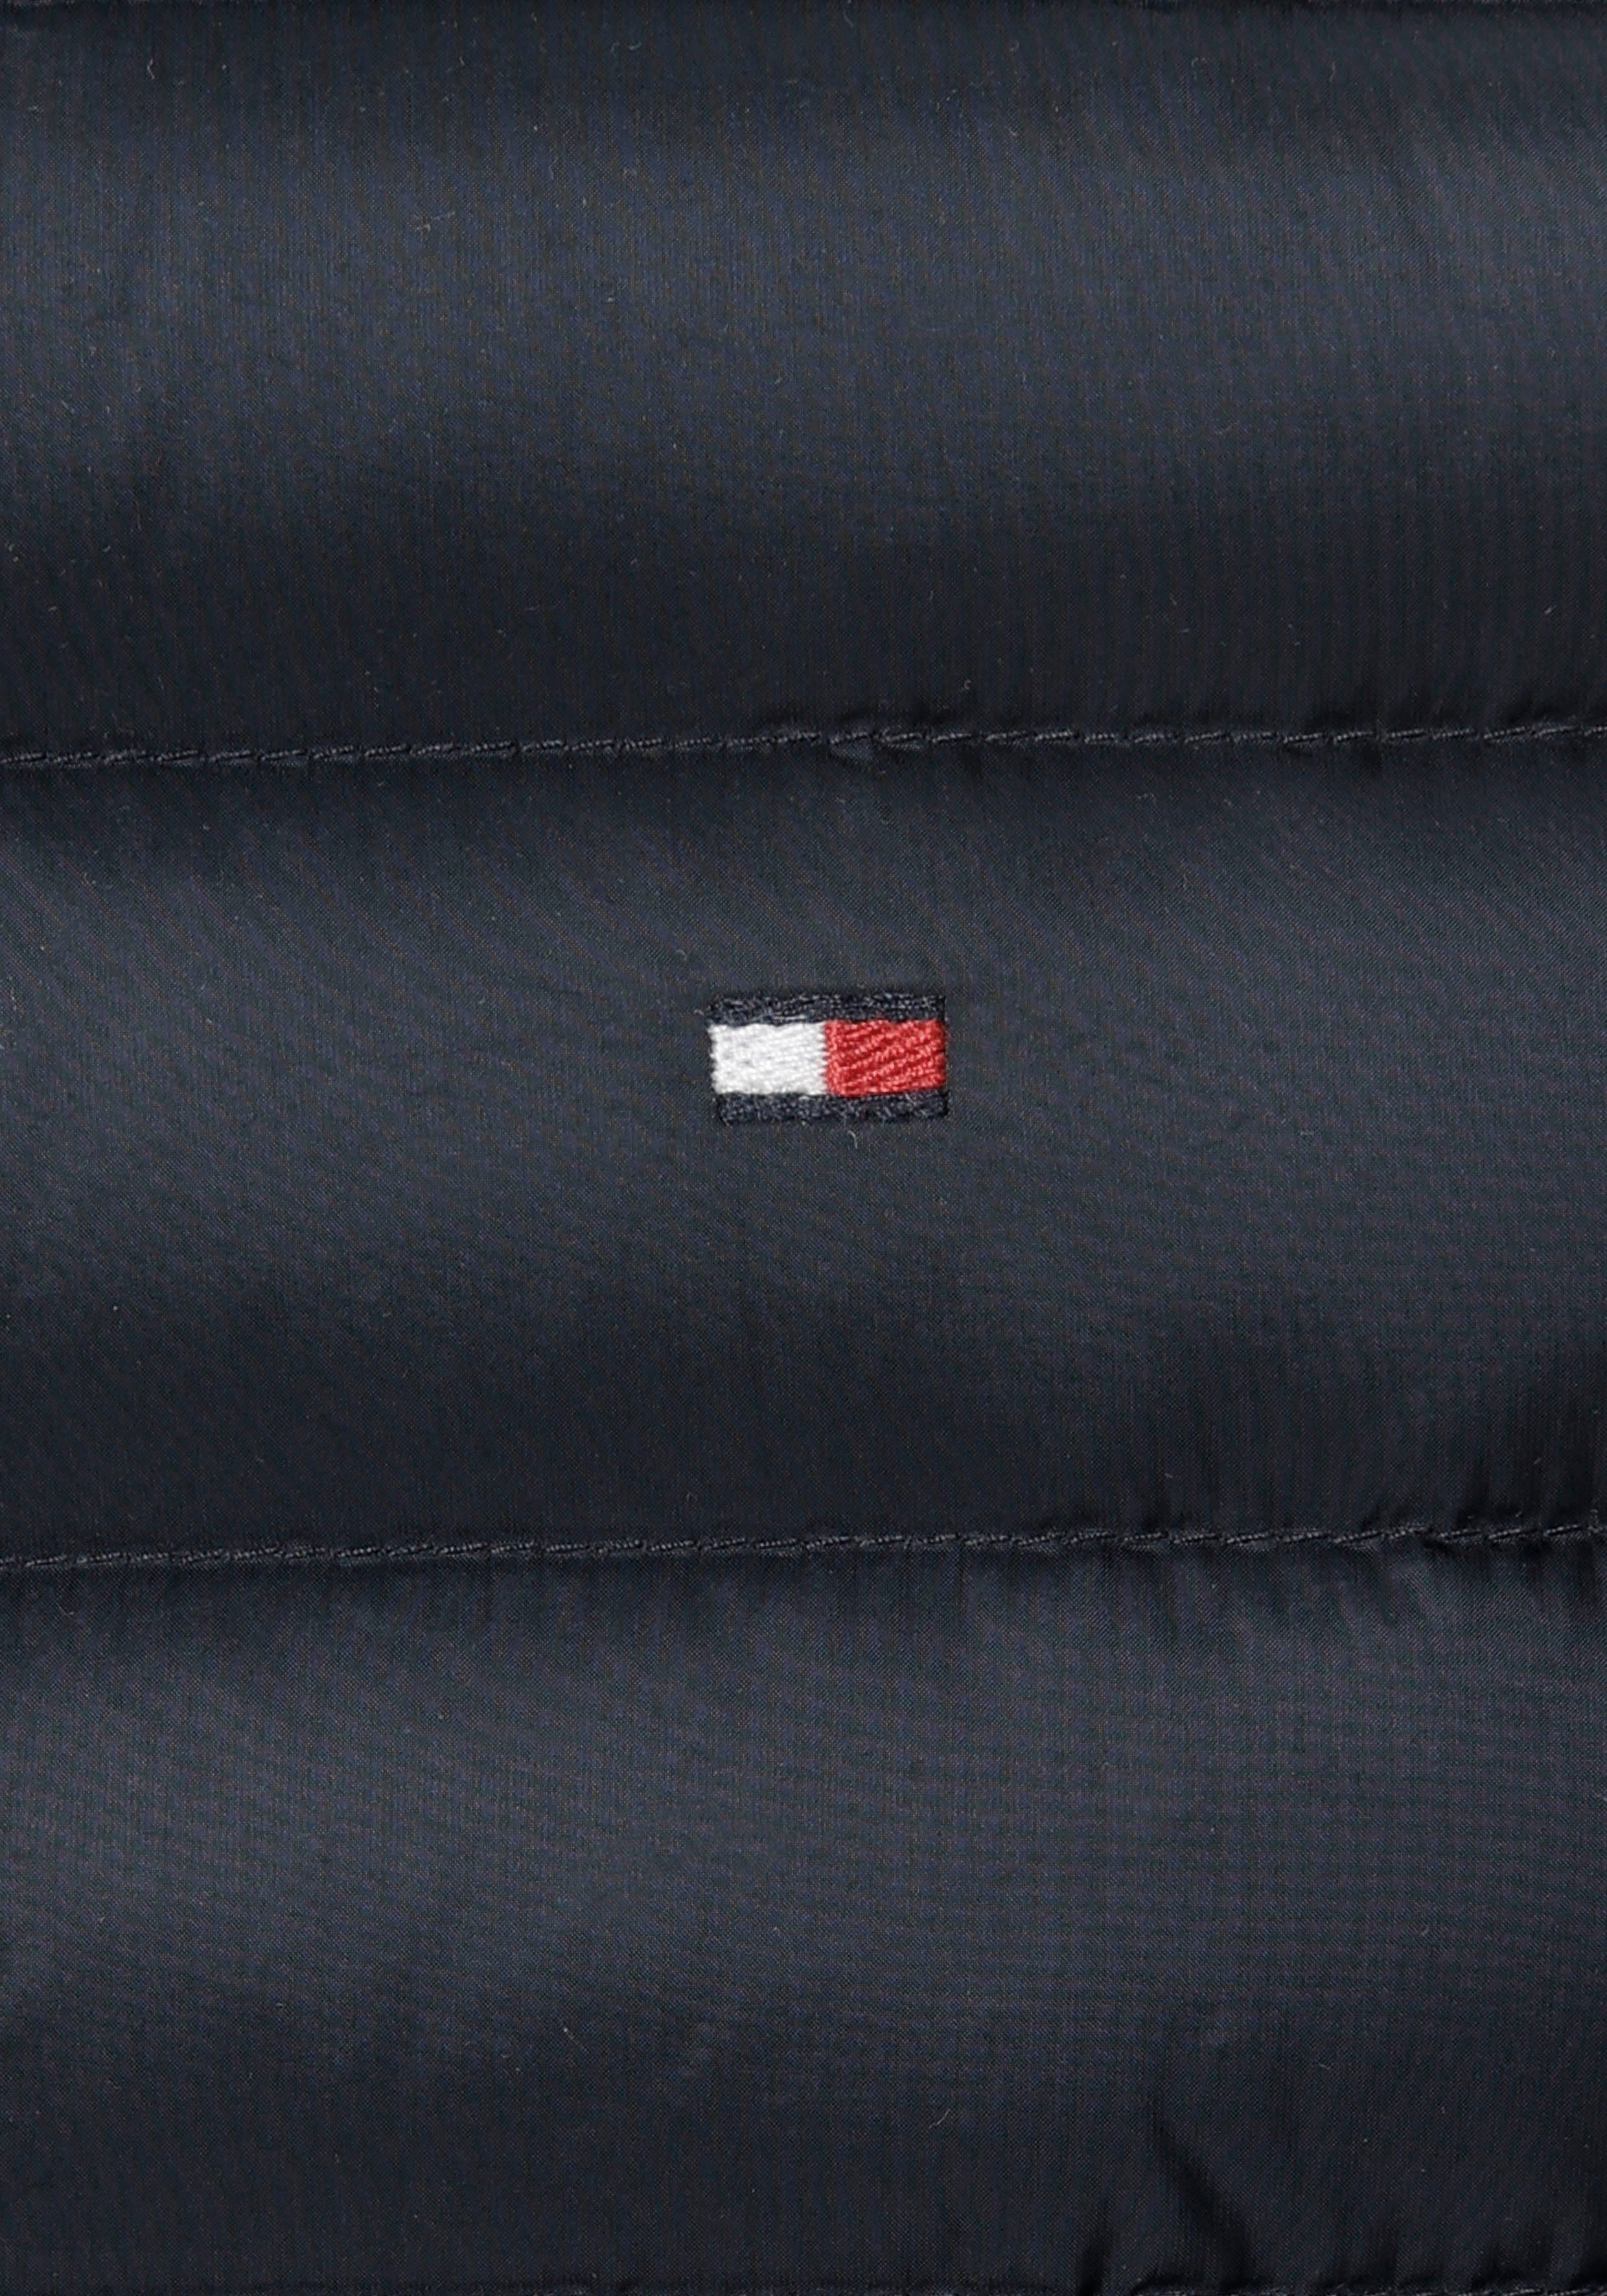 Steppjacke Tommy Hilfiger PACKABLE JACKET sky RECYCLED desert CORE